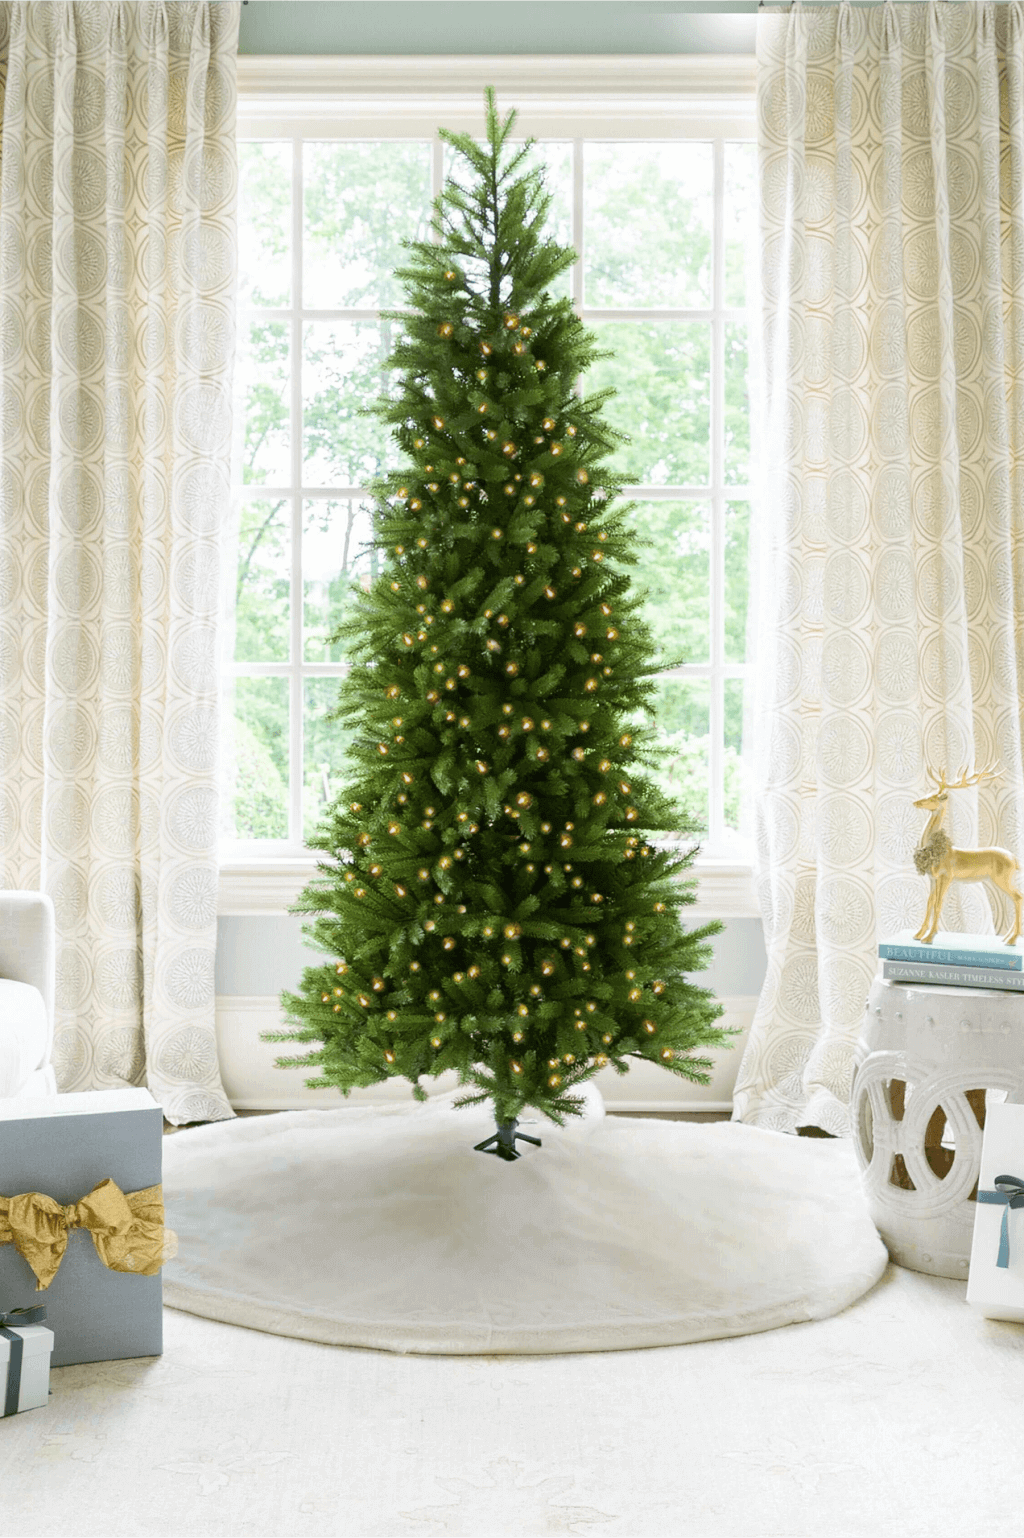 King of Christmas 7.5' King Fraser Fir Slim Quick-Shape Artificial Christmas Tree with 750 Dual Color Warm White & Multi-Color LED Lights